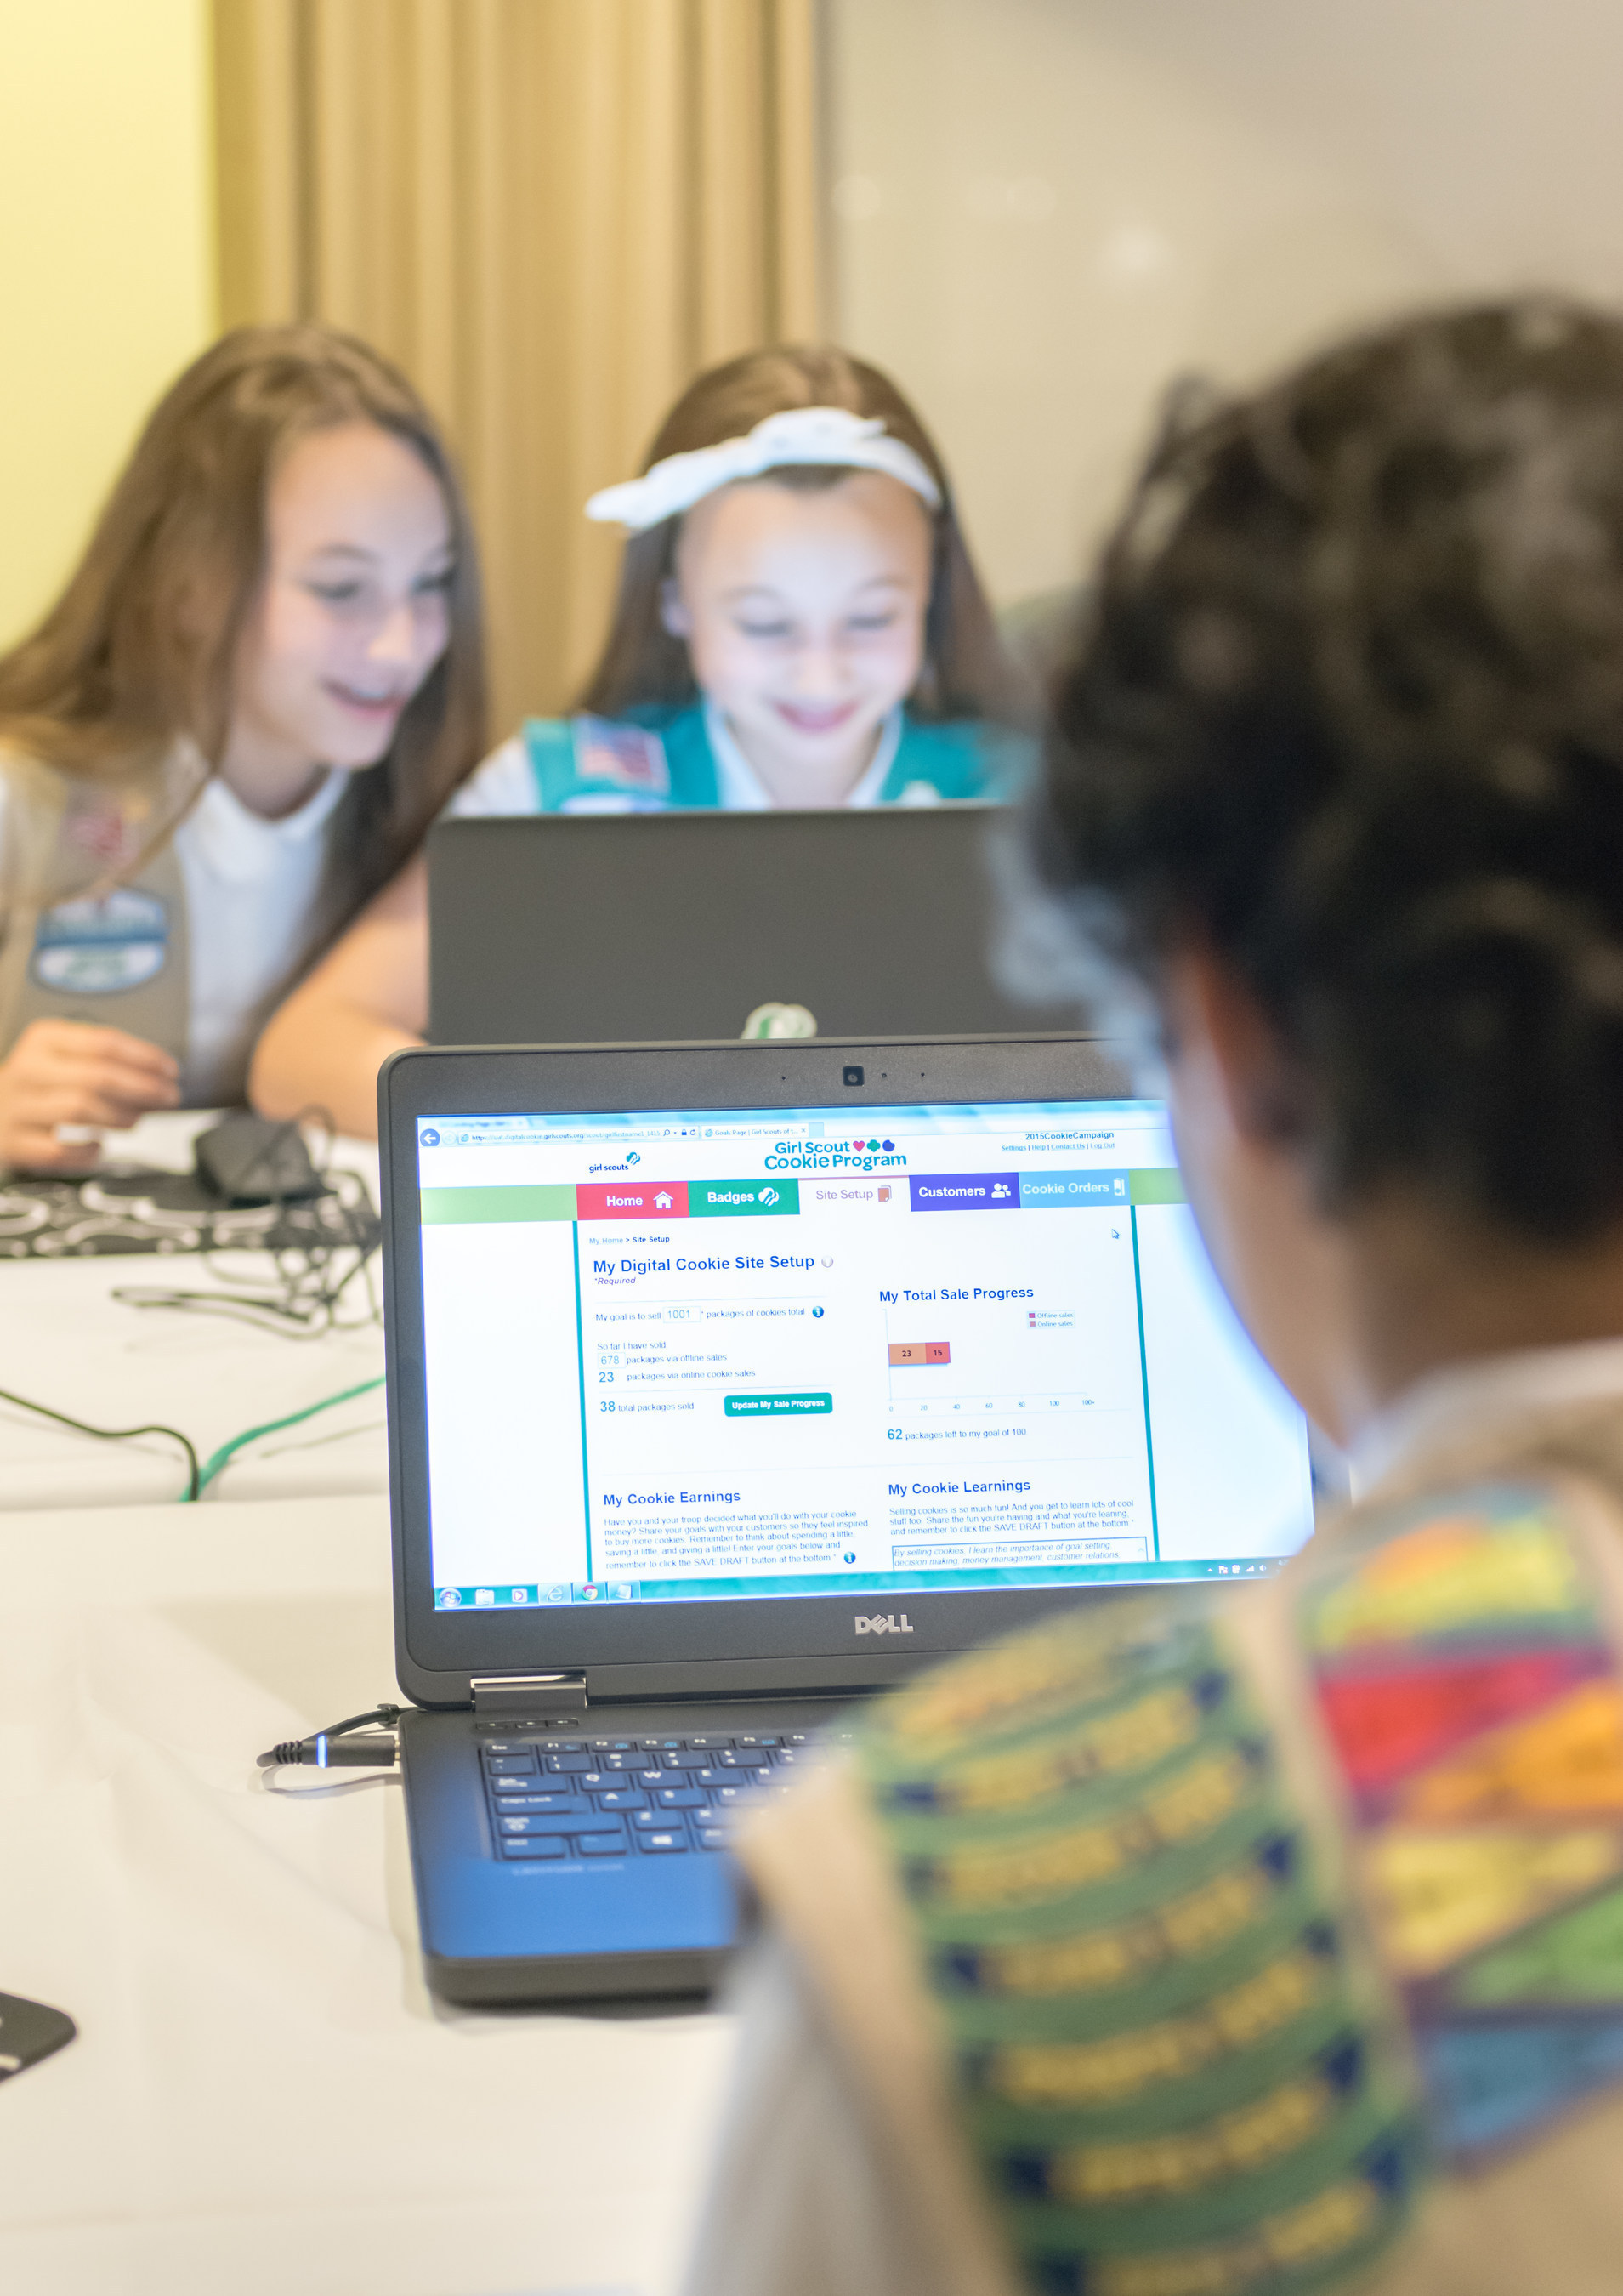 Girl Scouts experience Digital Cookie, a new addition to the Girl Scout Cookie Program, for the first time. Visit http://www.girlscouts.org/digitalcookie? for more information.